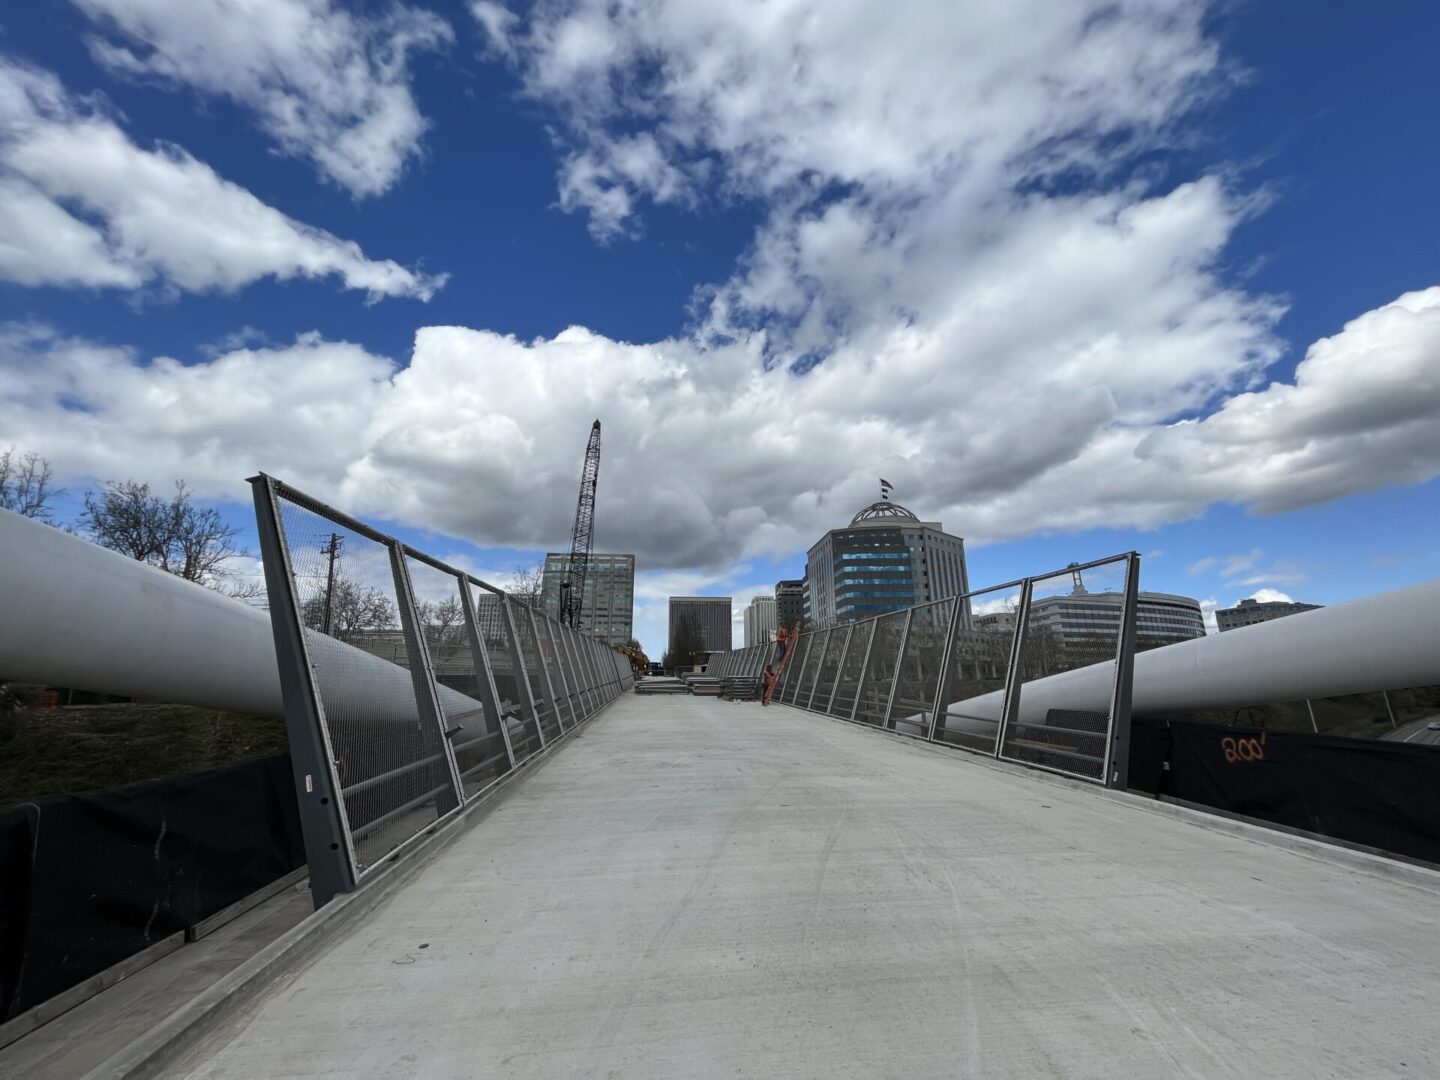 A bridge with some pipes on it and clouds in the sky